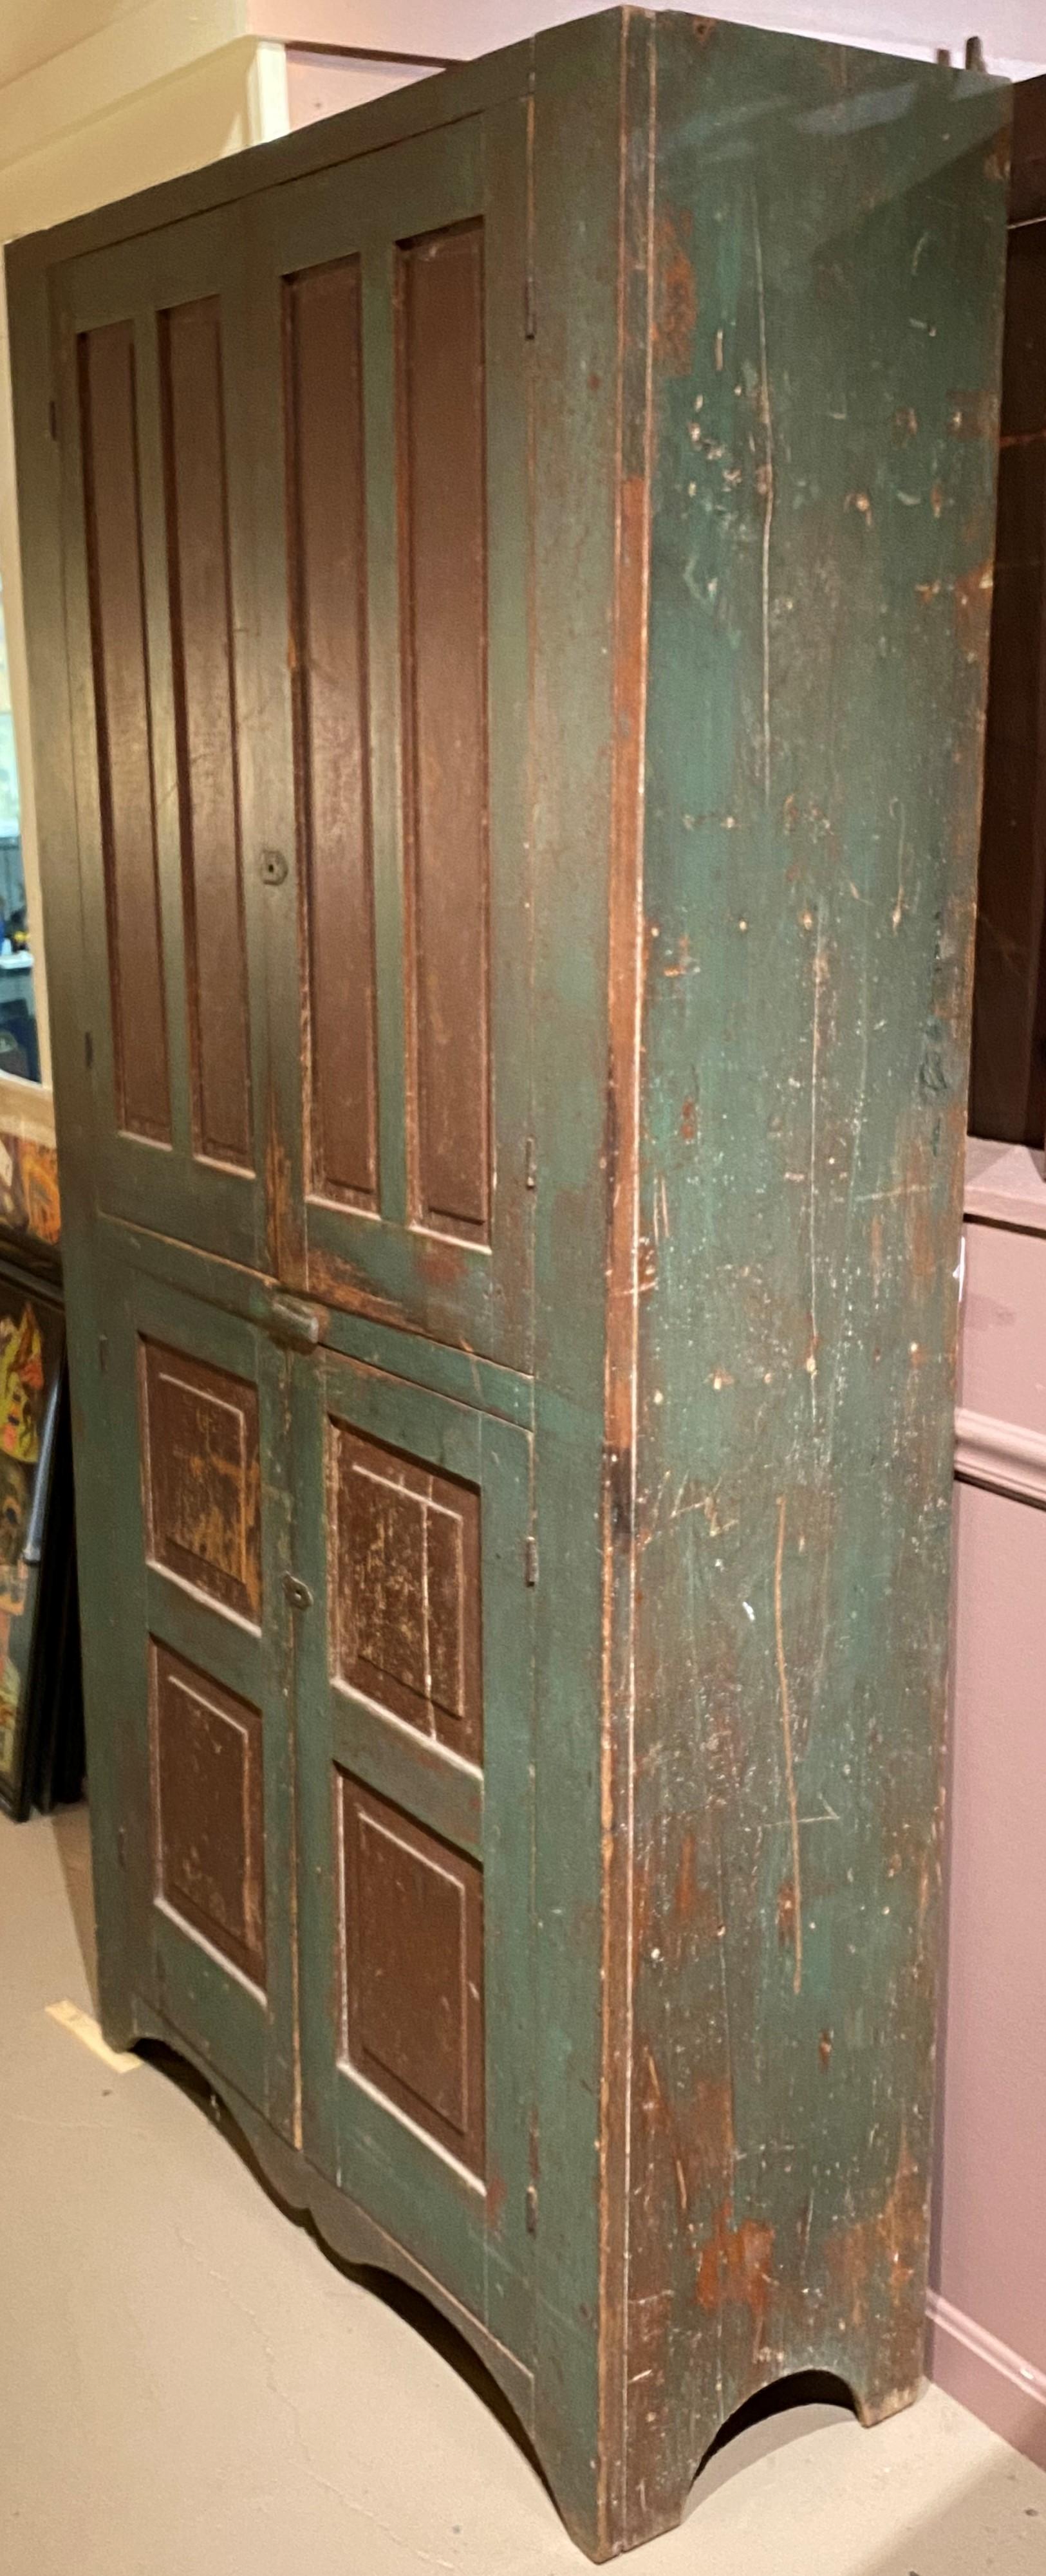 Pine Early 19th Century New England Paneled Cupboard in Green & Reddish Brown Paint For Sale